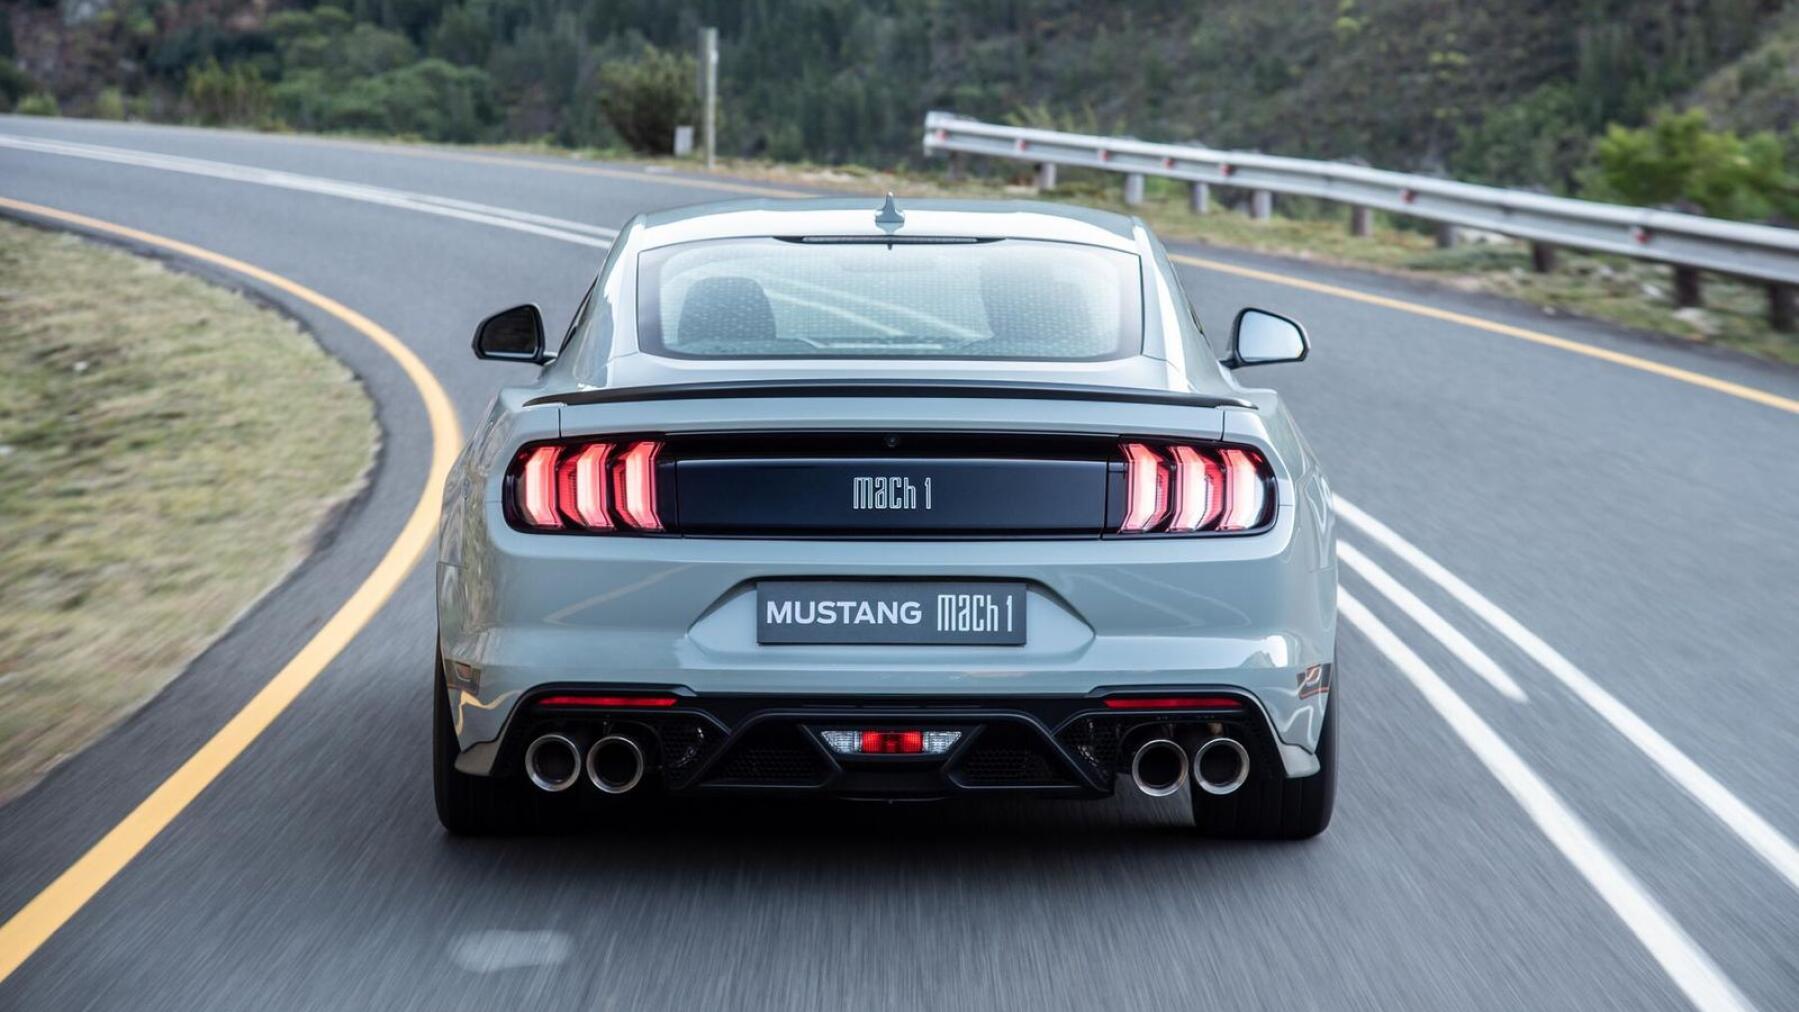 2021 Ford Mustang Mach 1 rear view